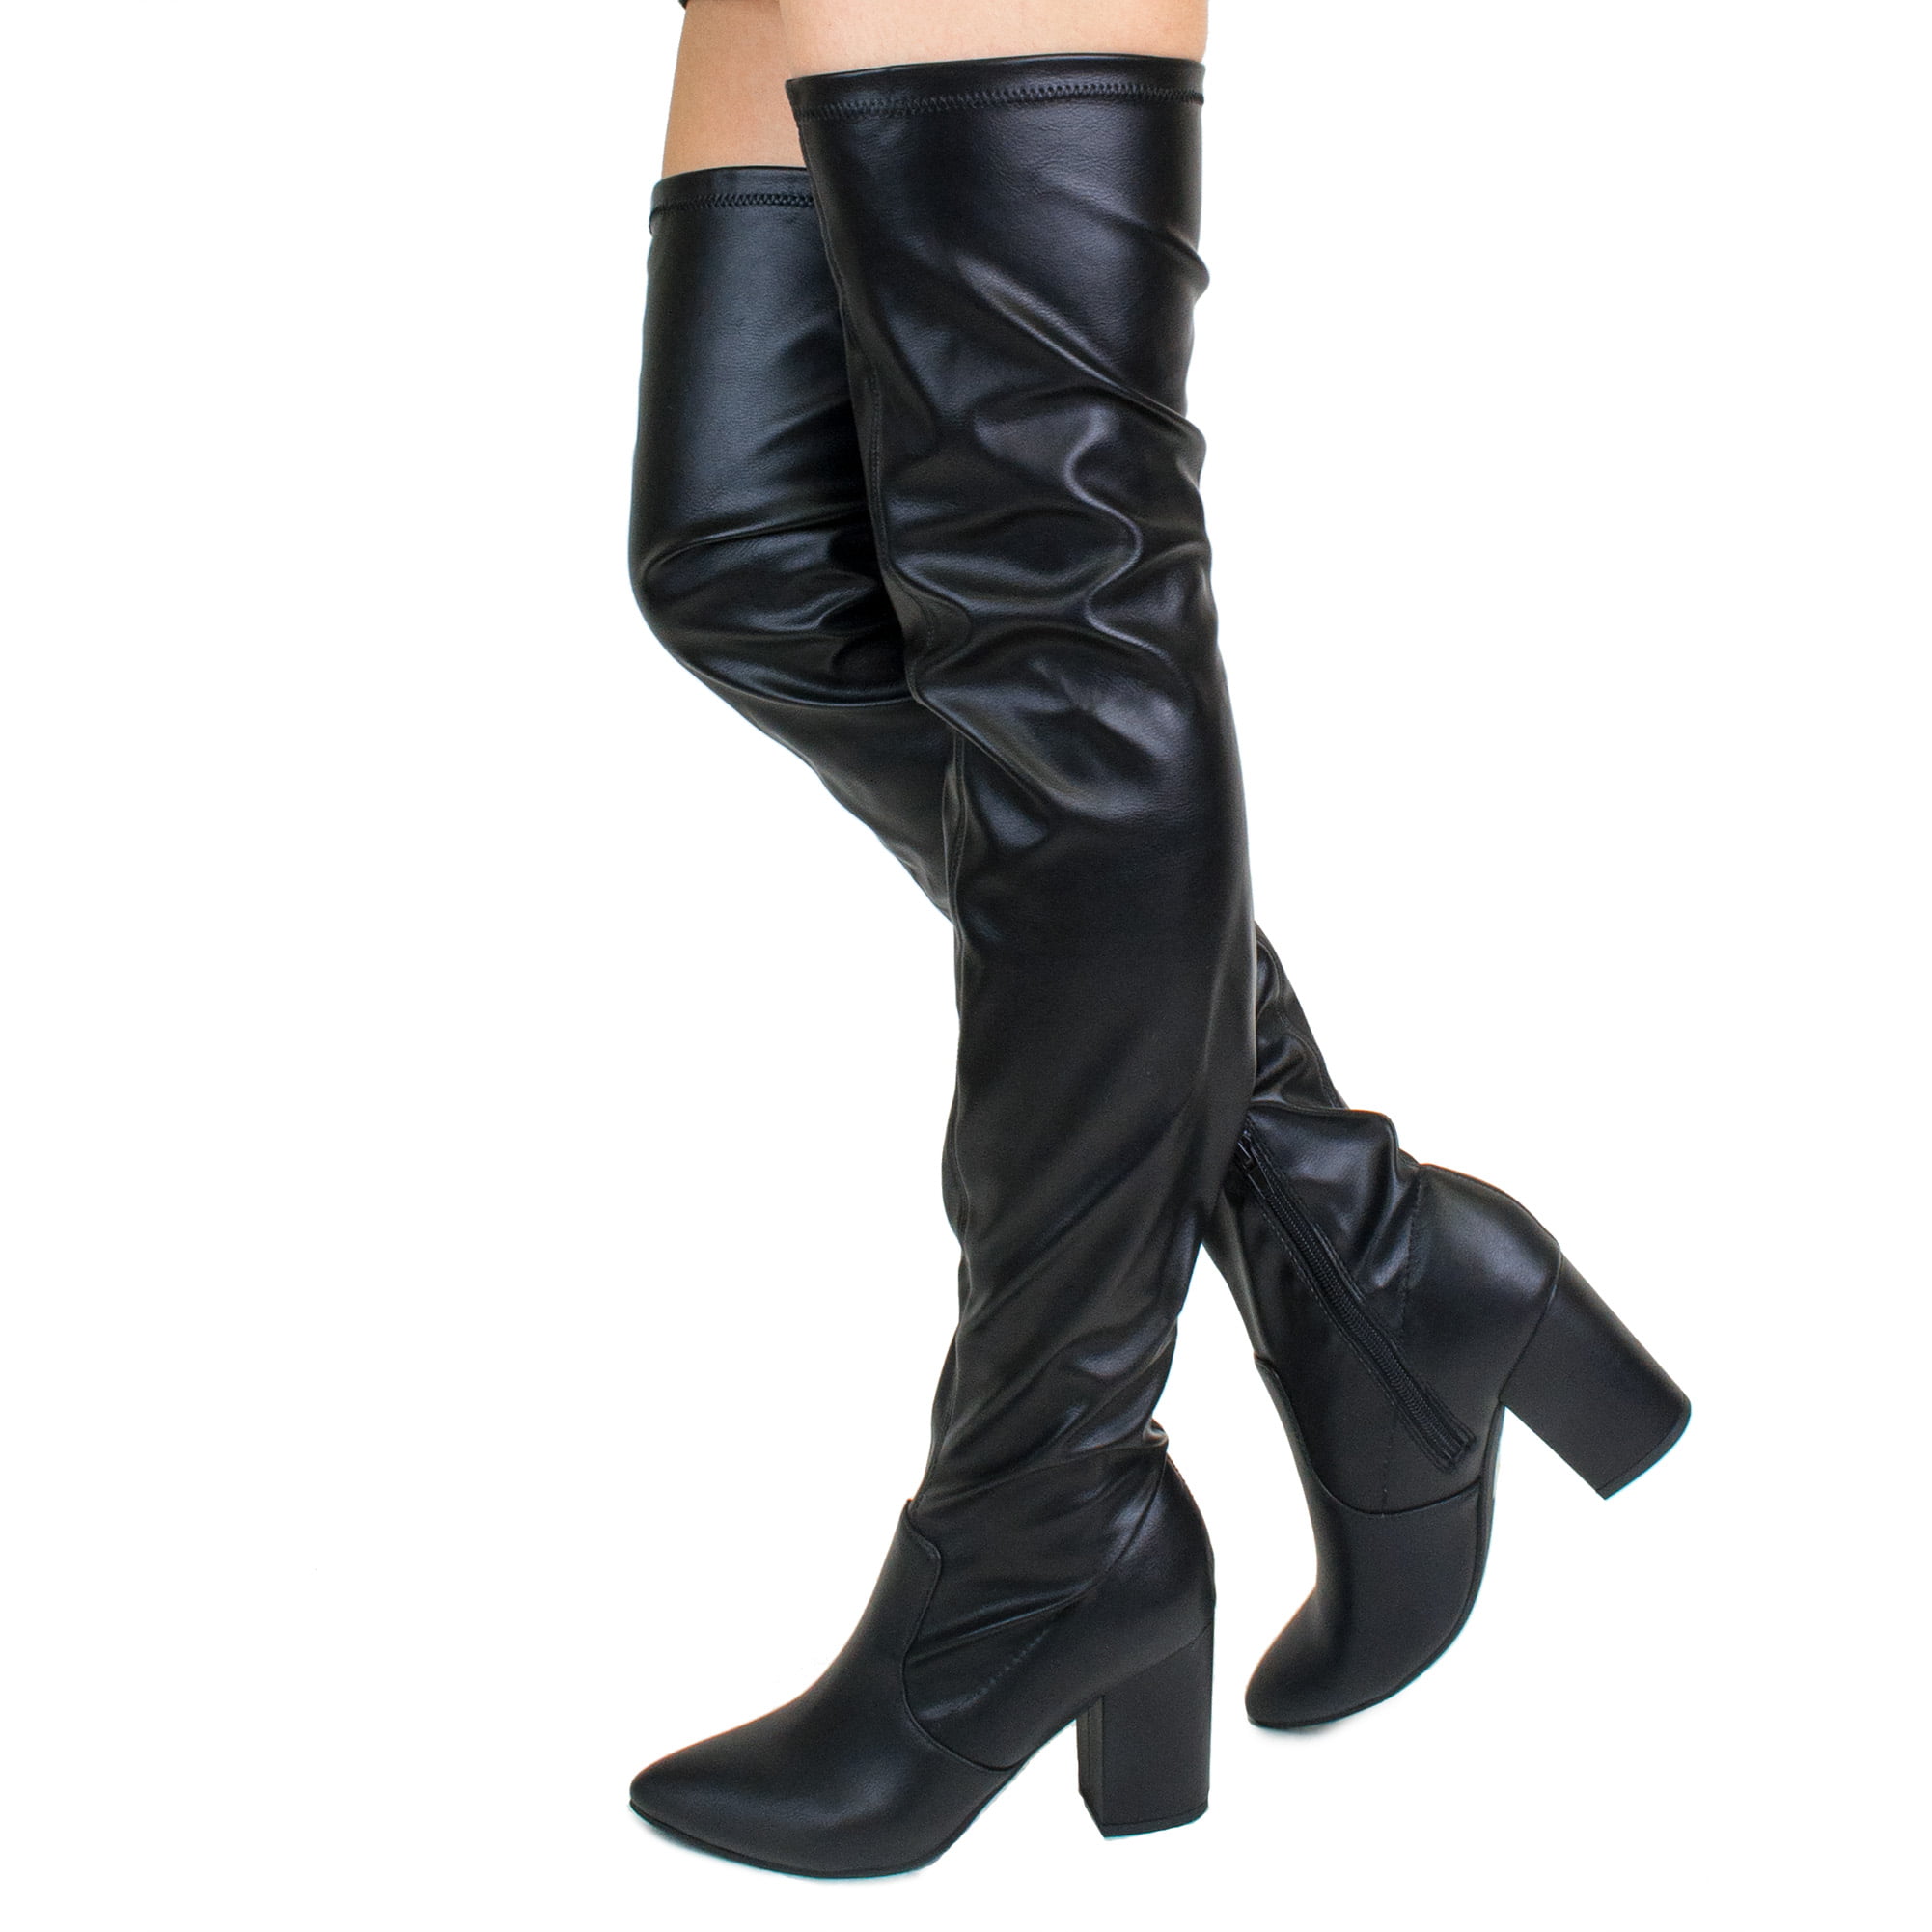 LADIES BLACK THIGH HIGH BOOTS OVER THE KNEE PARTY STRETCH BLOCK MID HEEL SIZE 3 